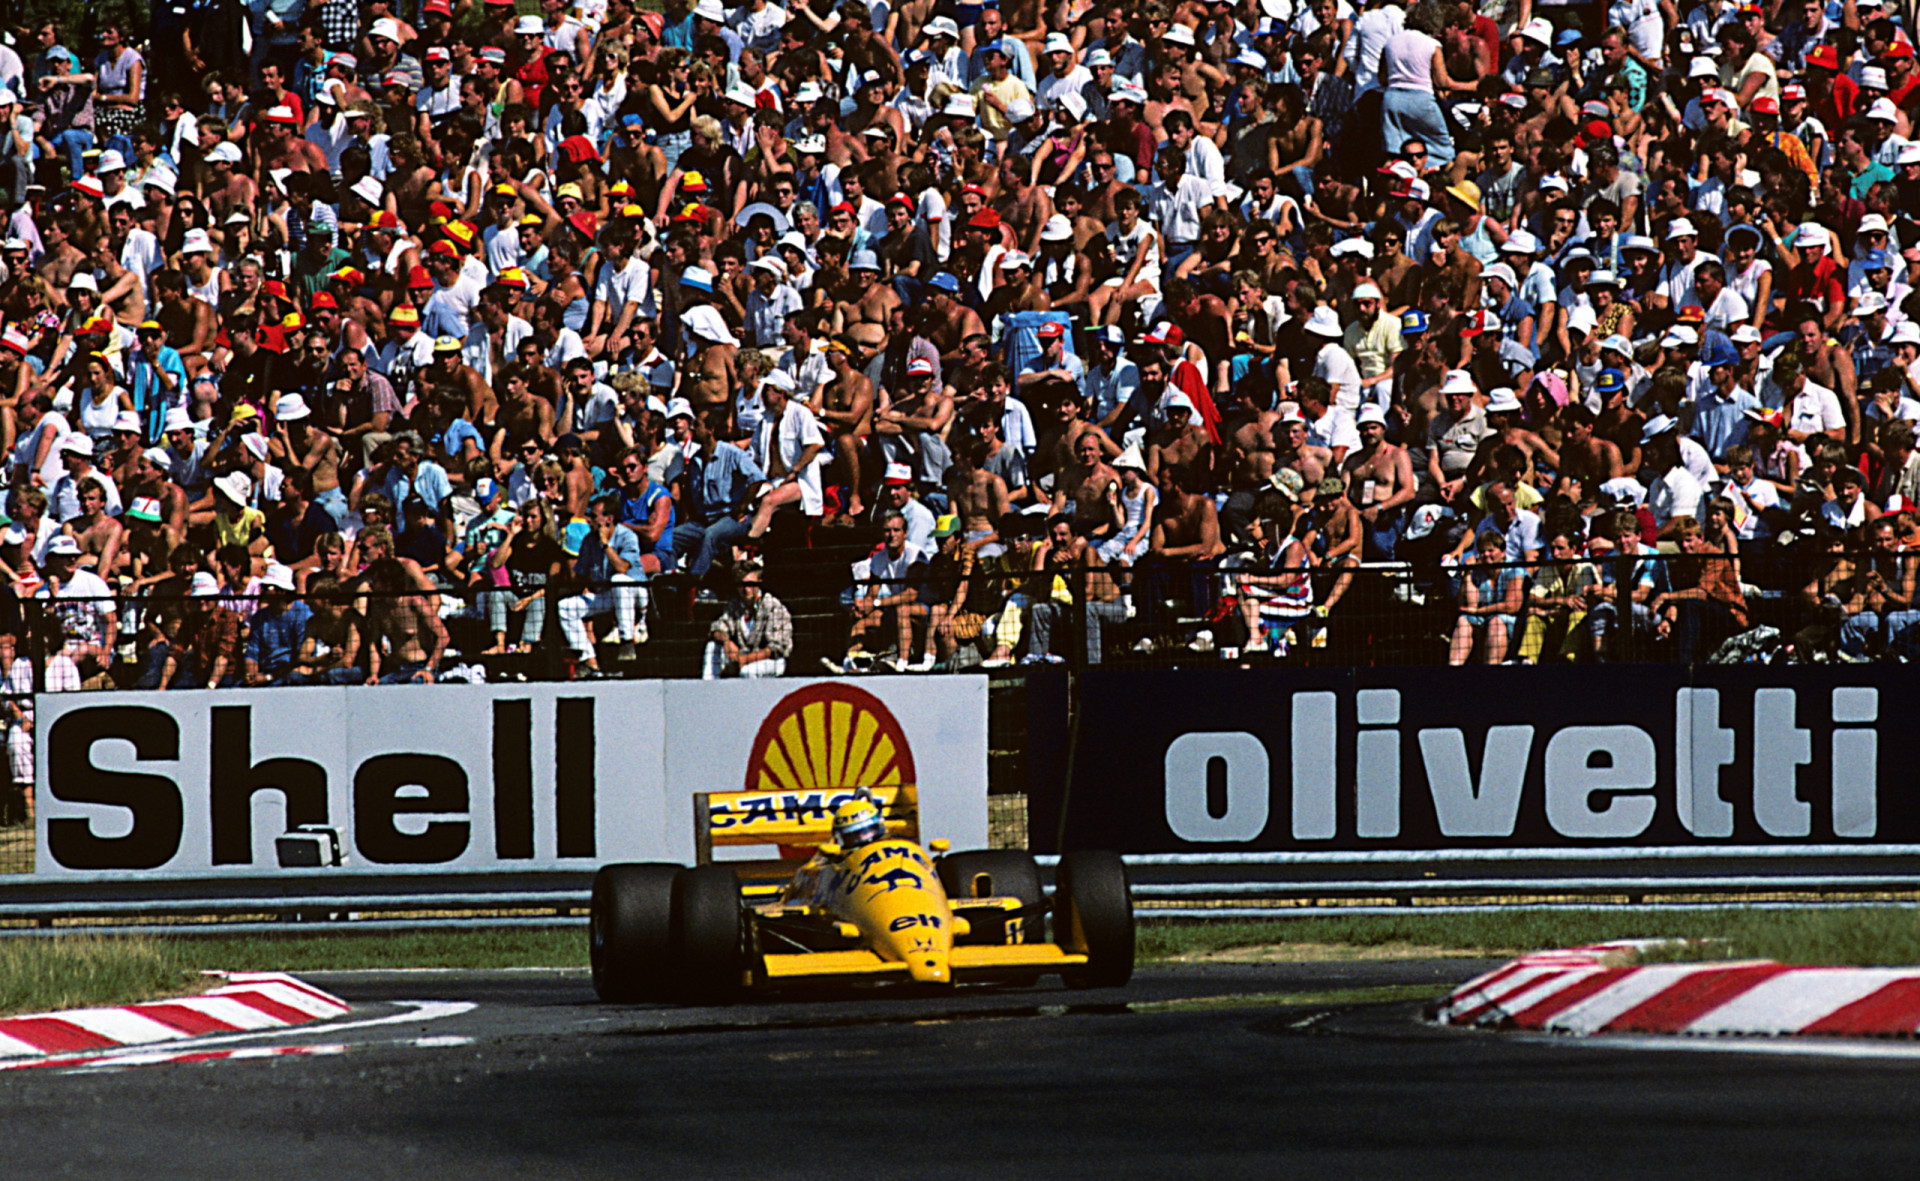 <p>The 1987 season was Senna's last with Lotus. McLaren had already expressed interest in poaching the Brazilian—and Honda's class-leading engines. Throughout the year, Senna had built a deep relationship with Honda, which paid big dividends, as McClaren ultimately secured Honda's V6 turbo engines for 1988.</p><p><a href="https://www.msn.com/en-us/community/channel/vid-7xx8mnucu55yw63we9va2gwr7uihbxwc68fxqp25x6tg4ftibpra?cvid=94631541bc0f4f89bfd59158d696ad7e">Follow us and access great exclusive content every day</a></p>